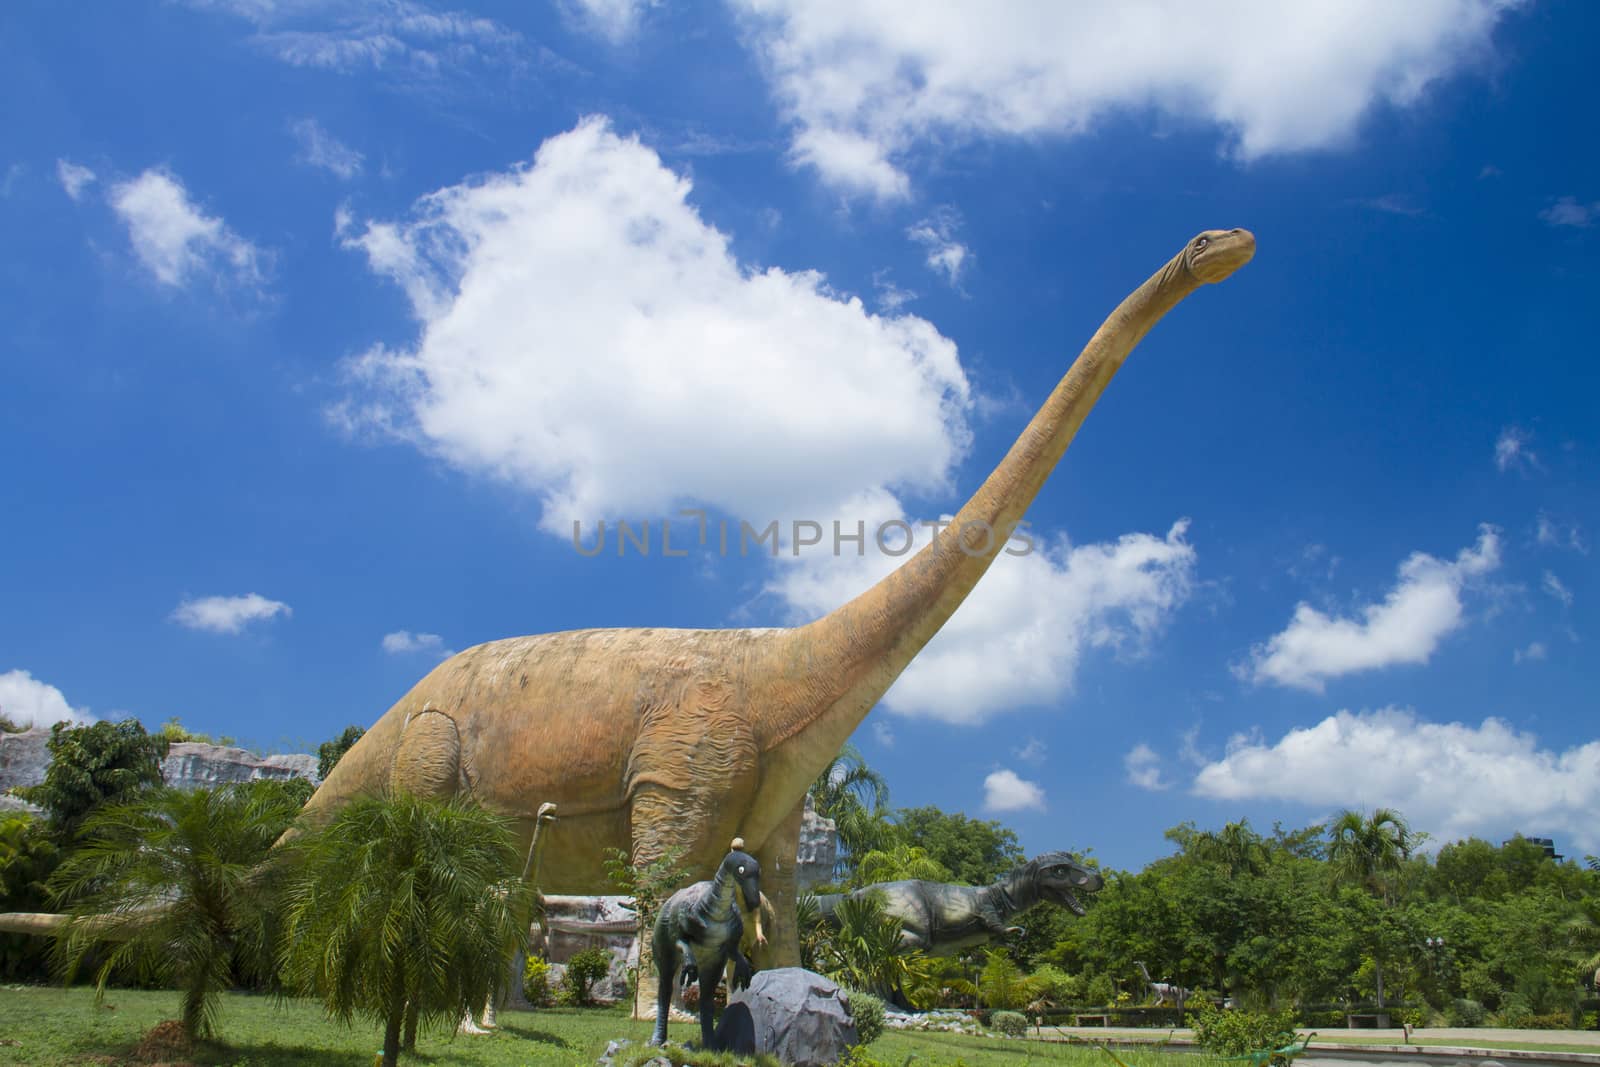 Phu Wiang Dinosaur Museum Wiang Kao district, Khon Kaen province.Thailand, Phu Wiang National Park had been established in 1991